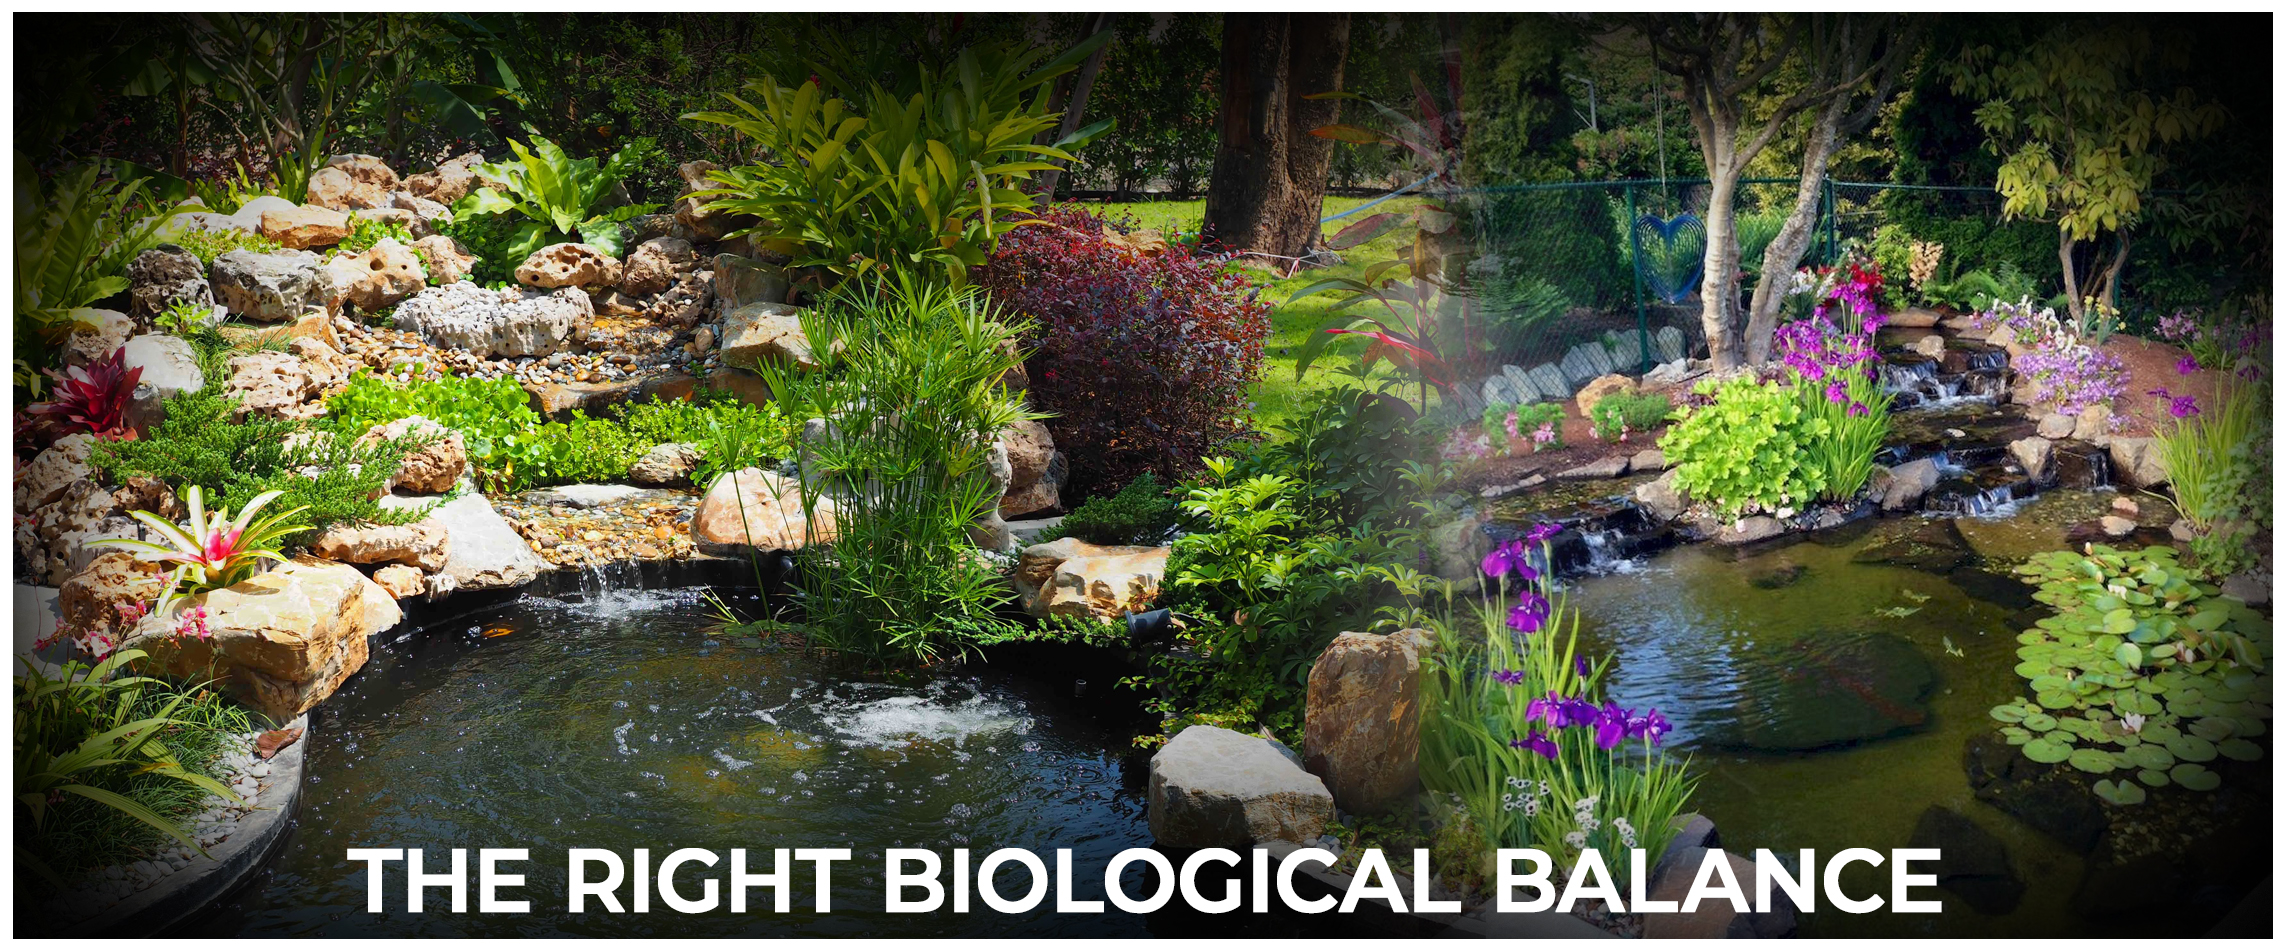  The Right Biological Balance